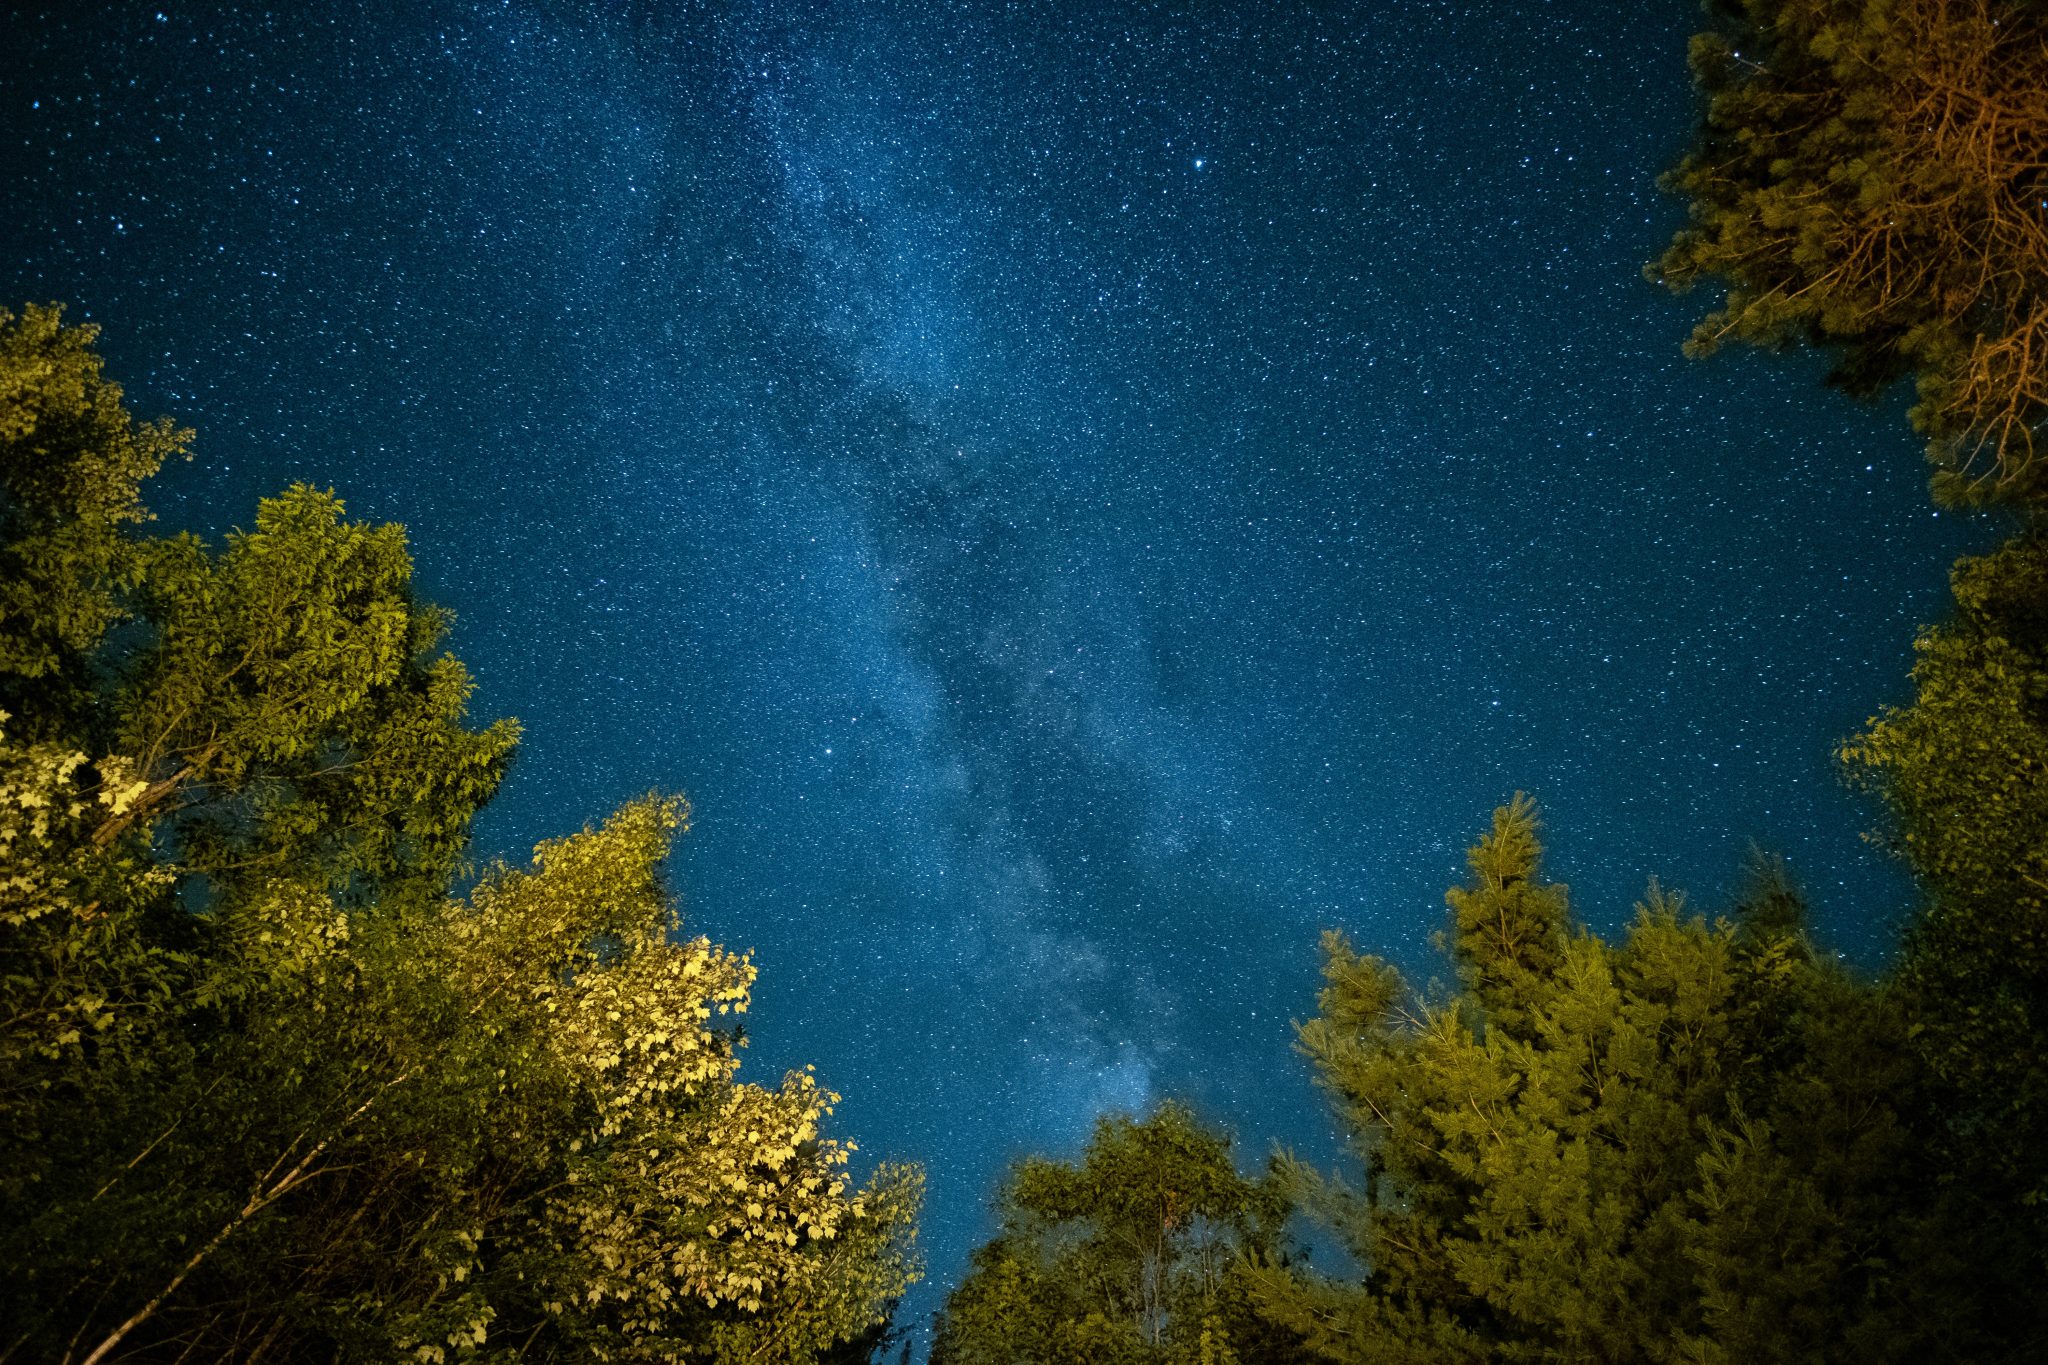 The milky way galaxy shines bright above some trees in the forest